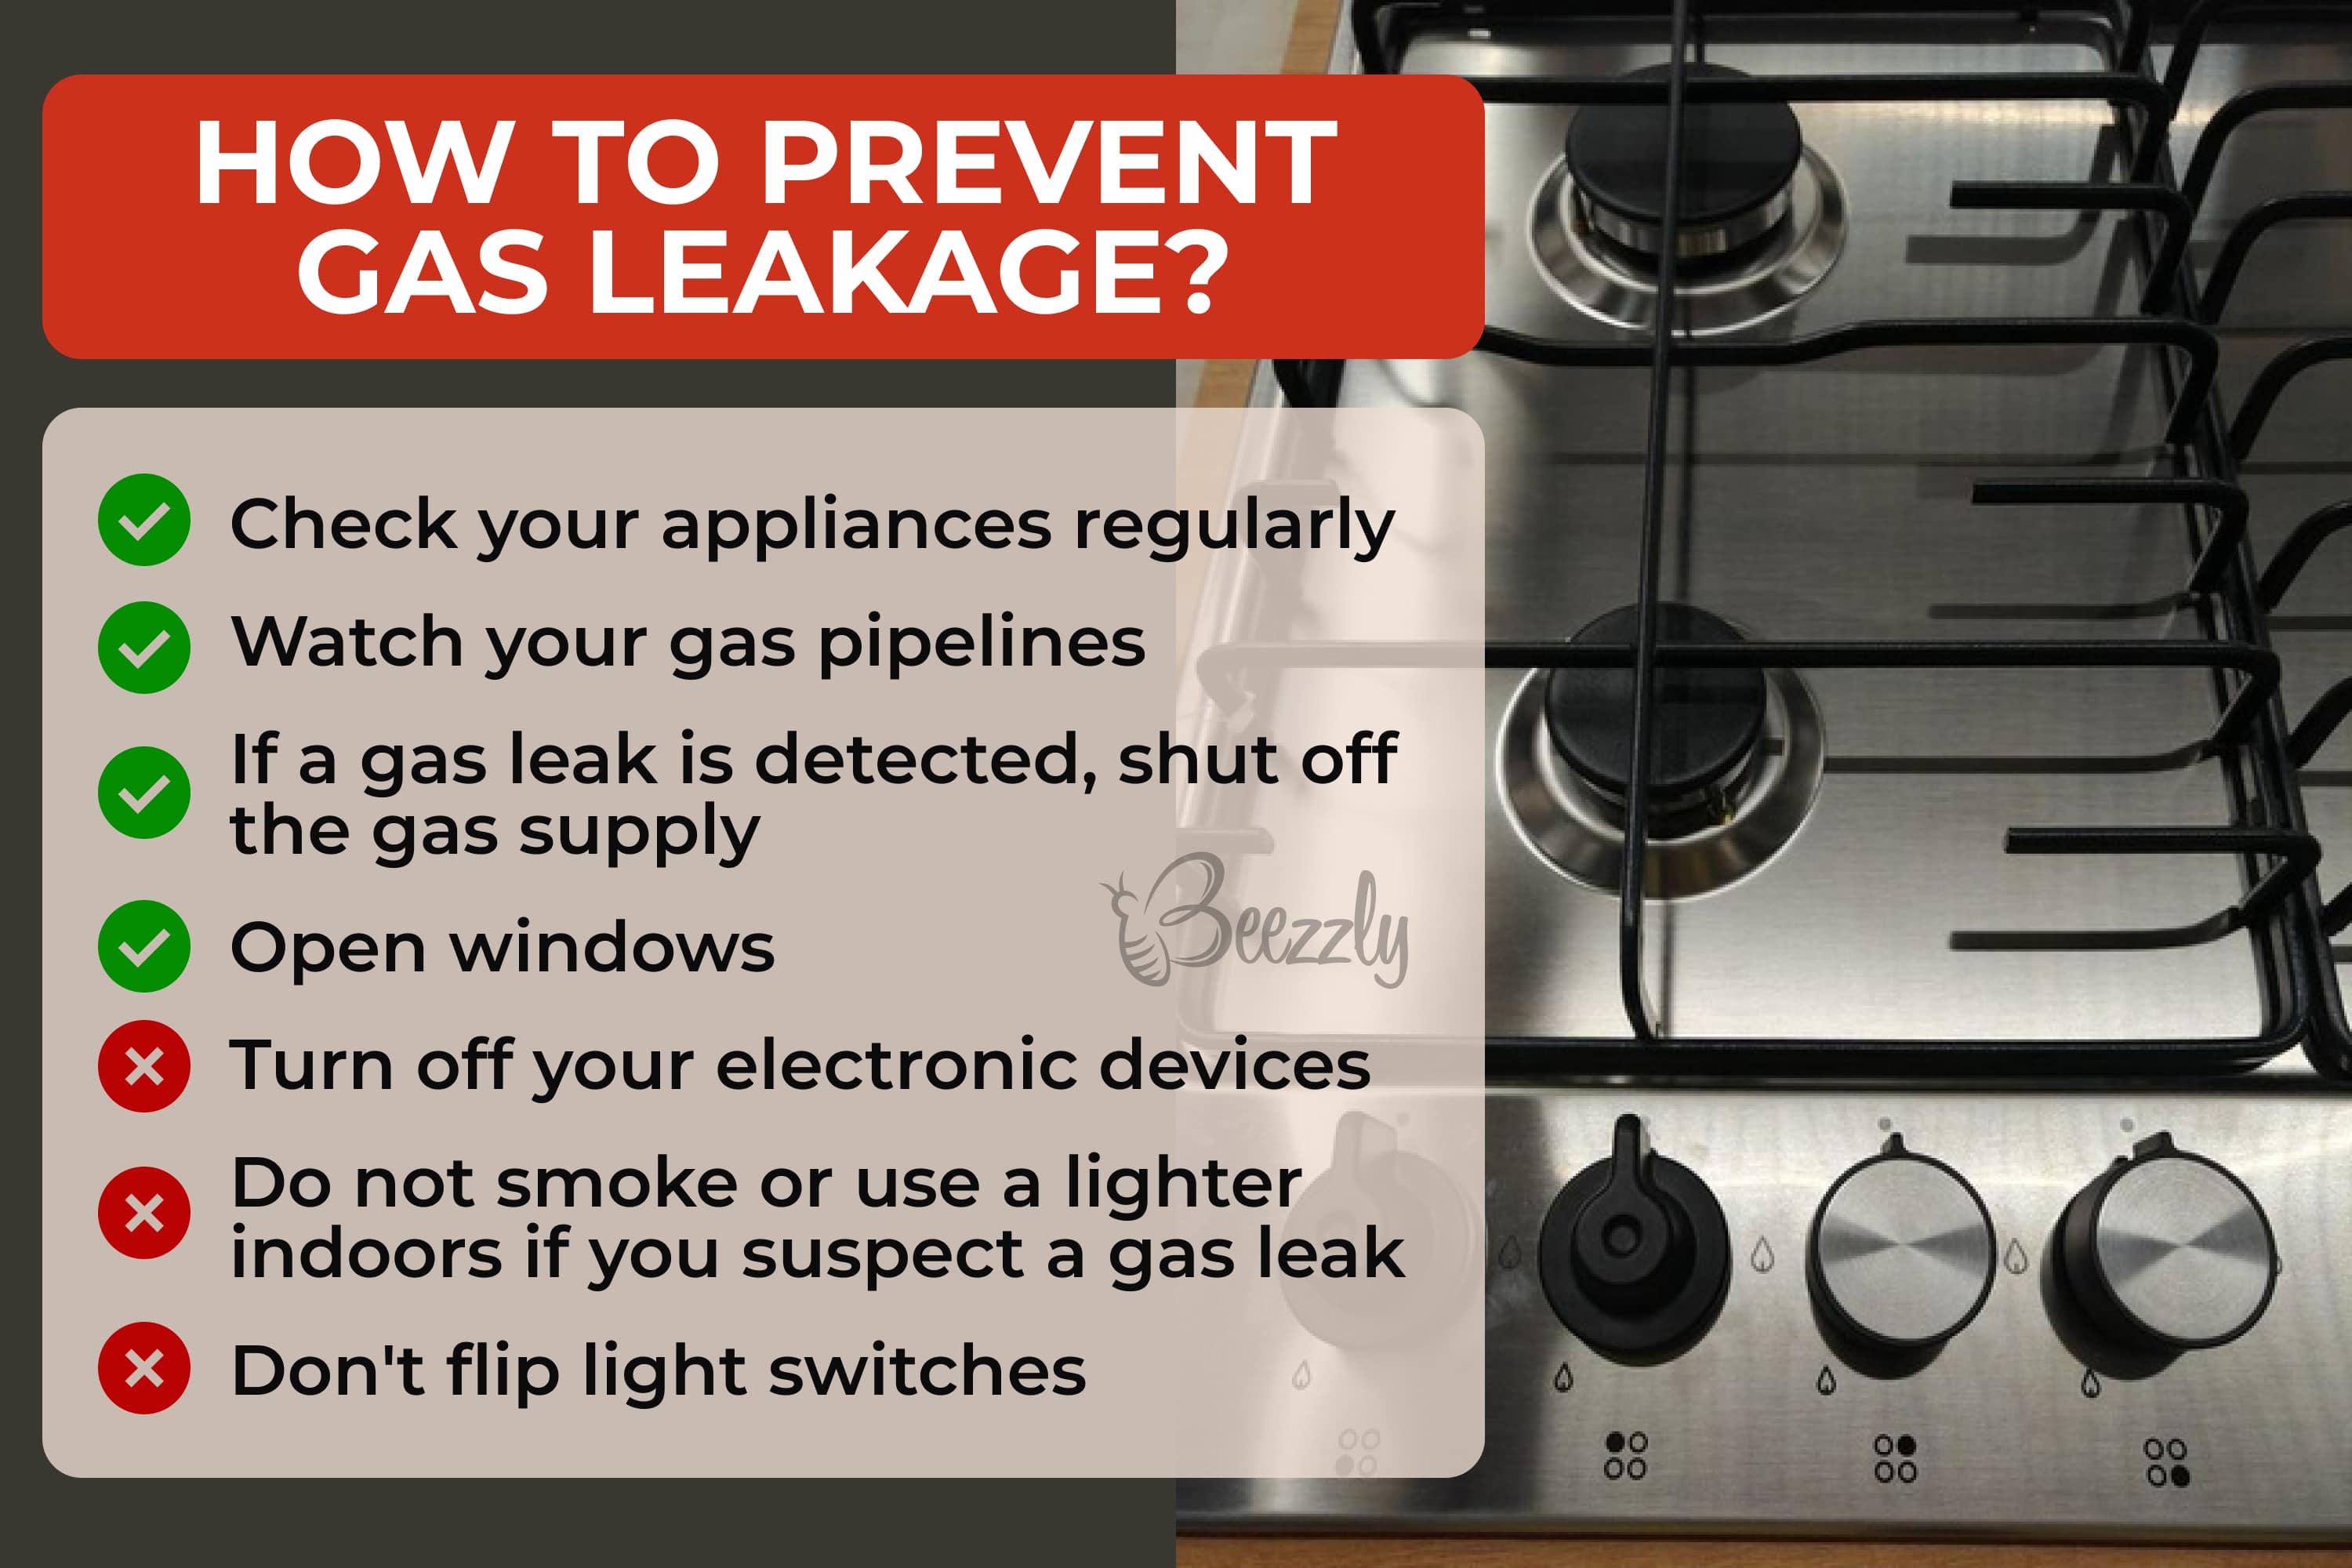 How to prevent gas leakage